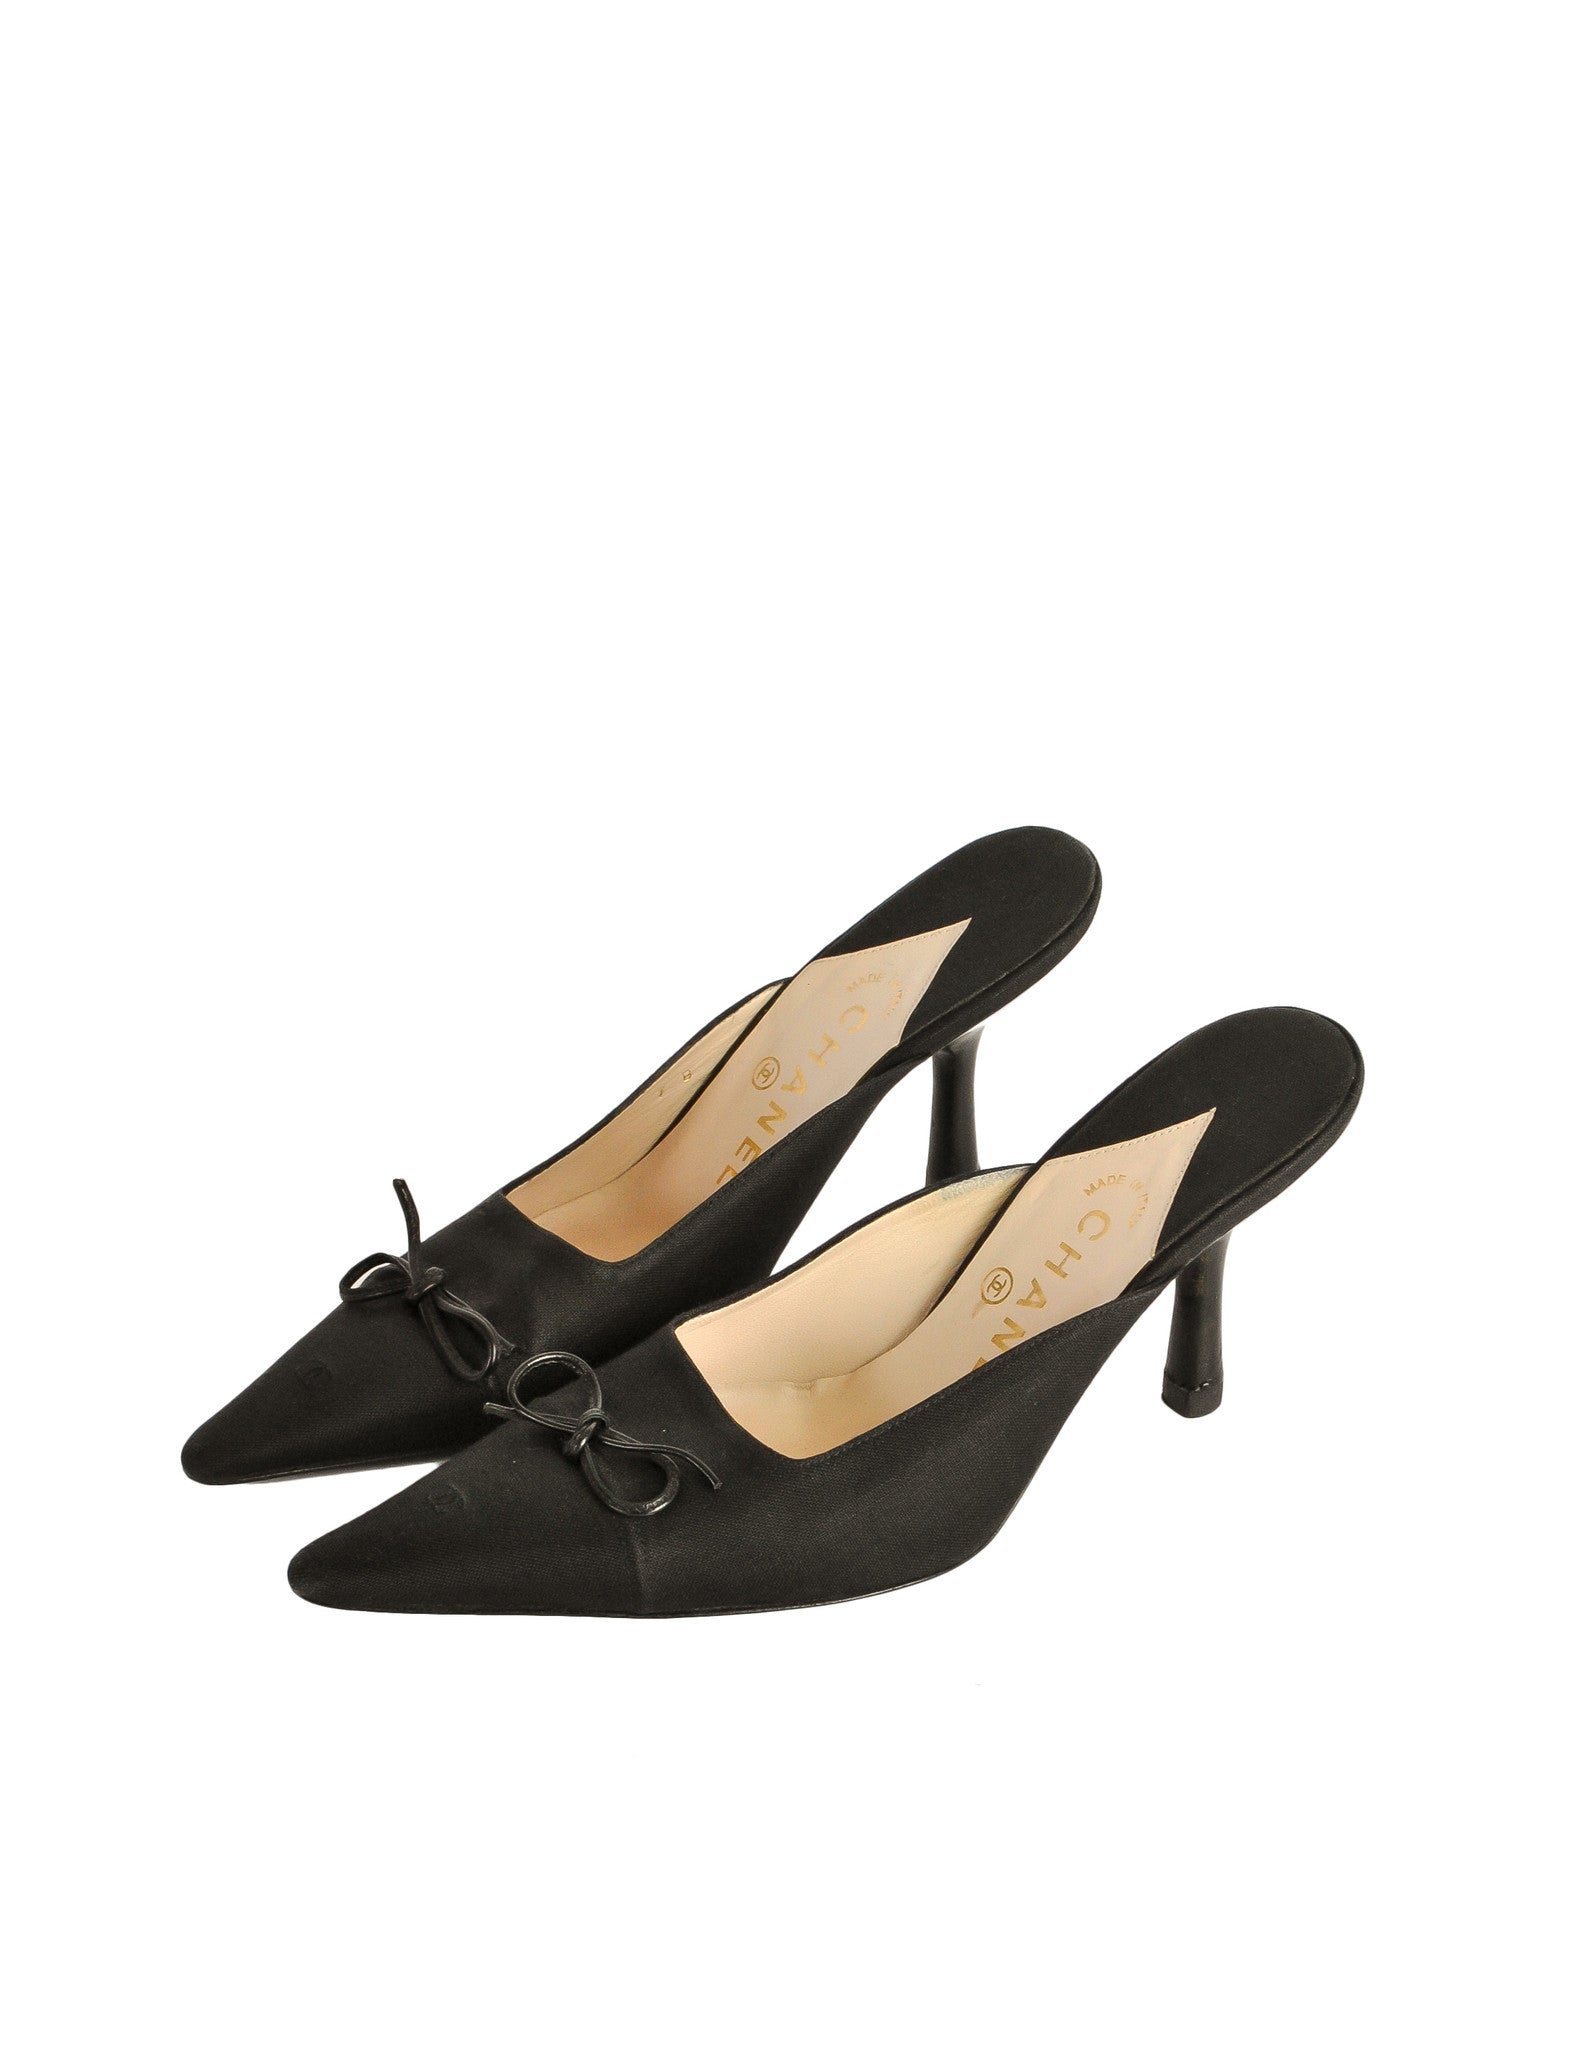 Chanel Vintage Black Pointed Toe Bow Mules - from Amarcord Vintage Fashion